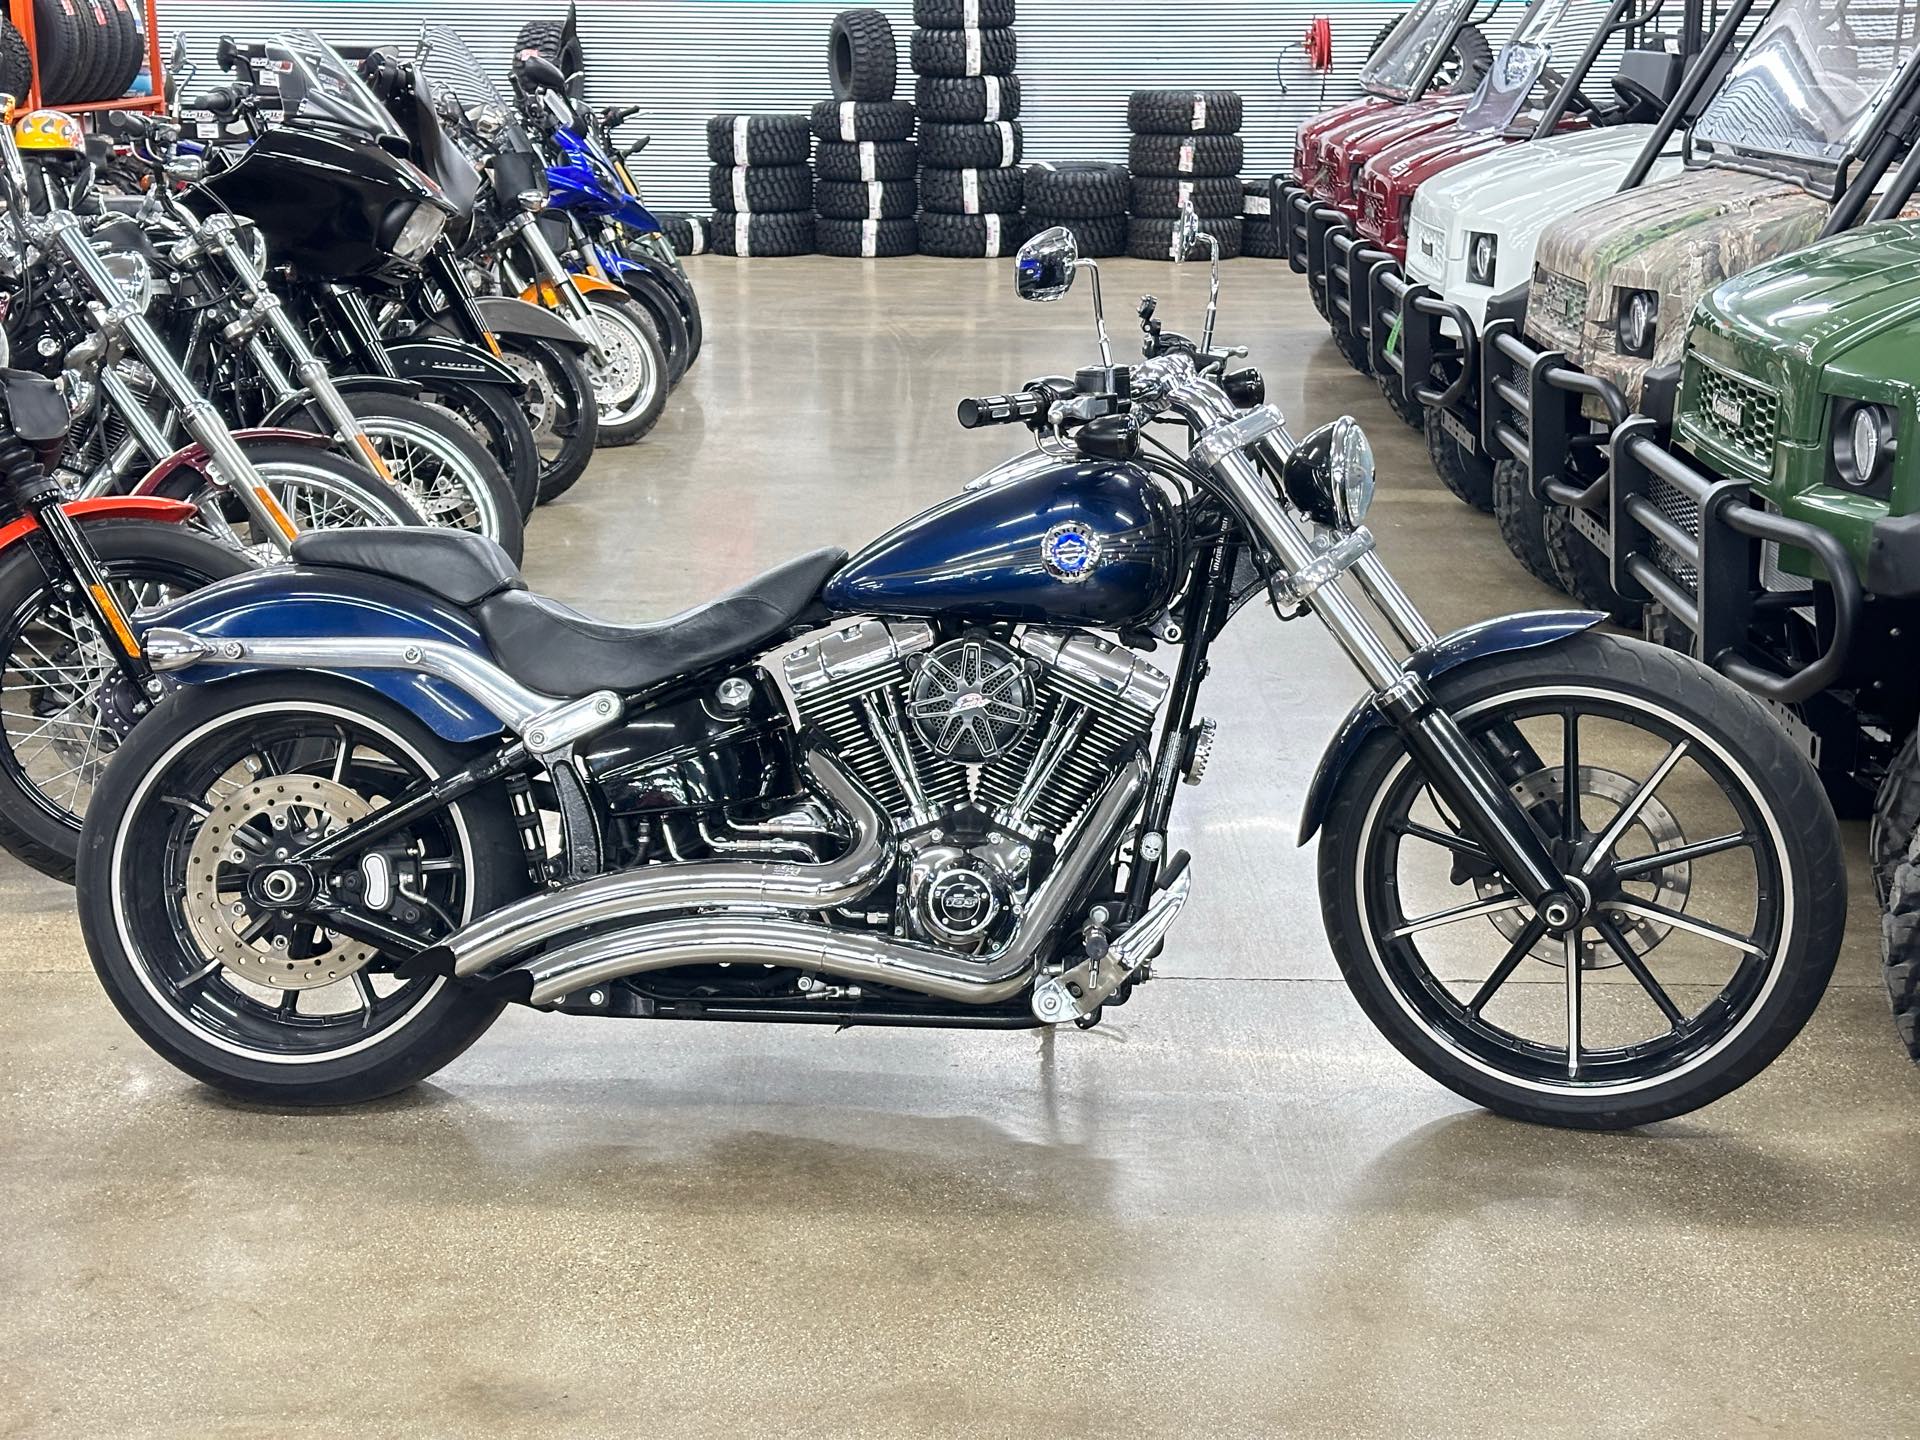 2013 Harley-Davidson Softail Breakout at ATVs and More